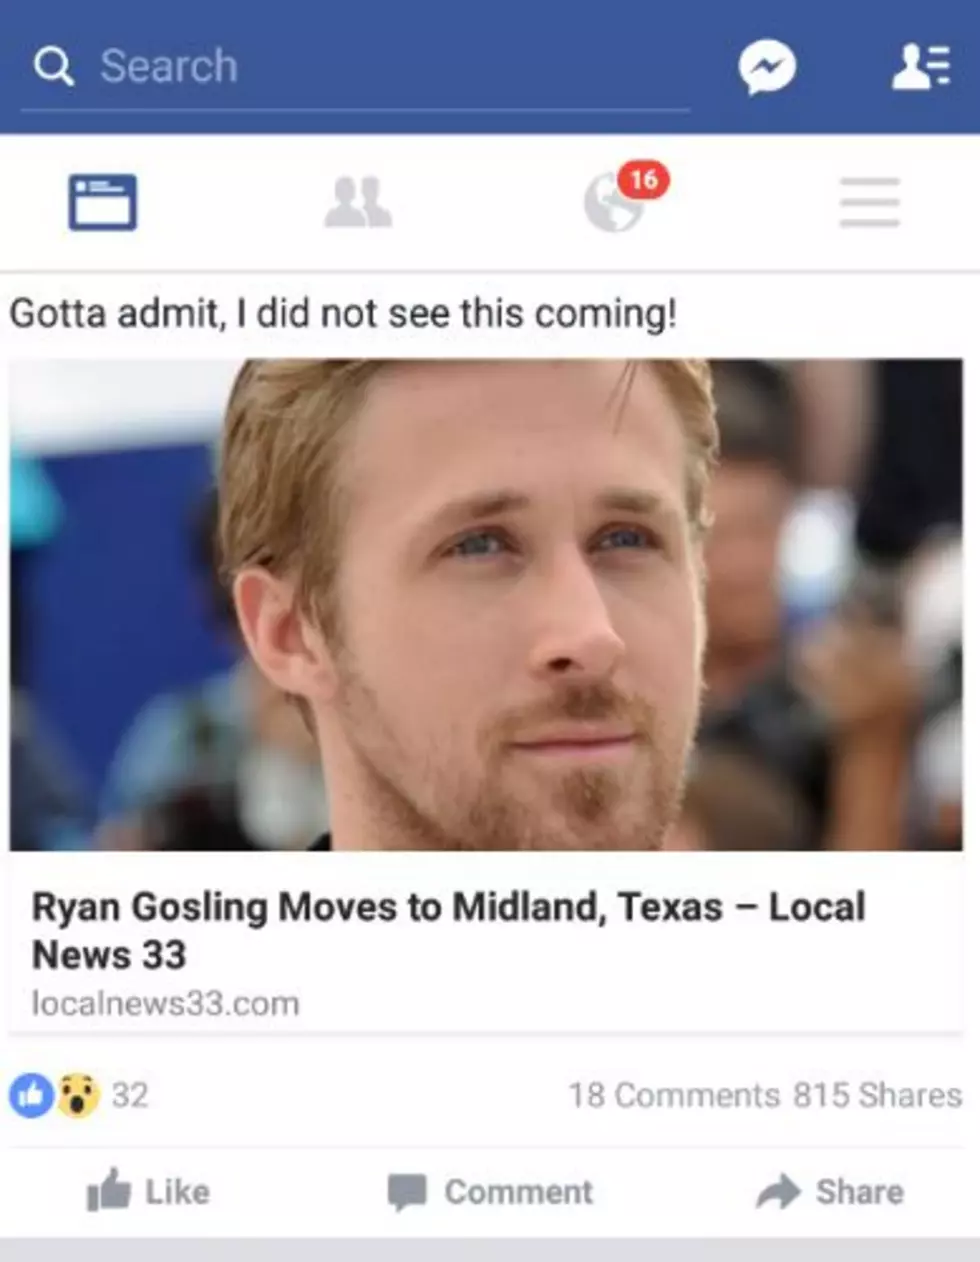 What’s With Ryan Gosling Buying House In Midland Popping Up In Facebook Newsfeeds?